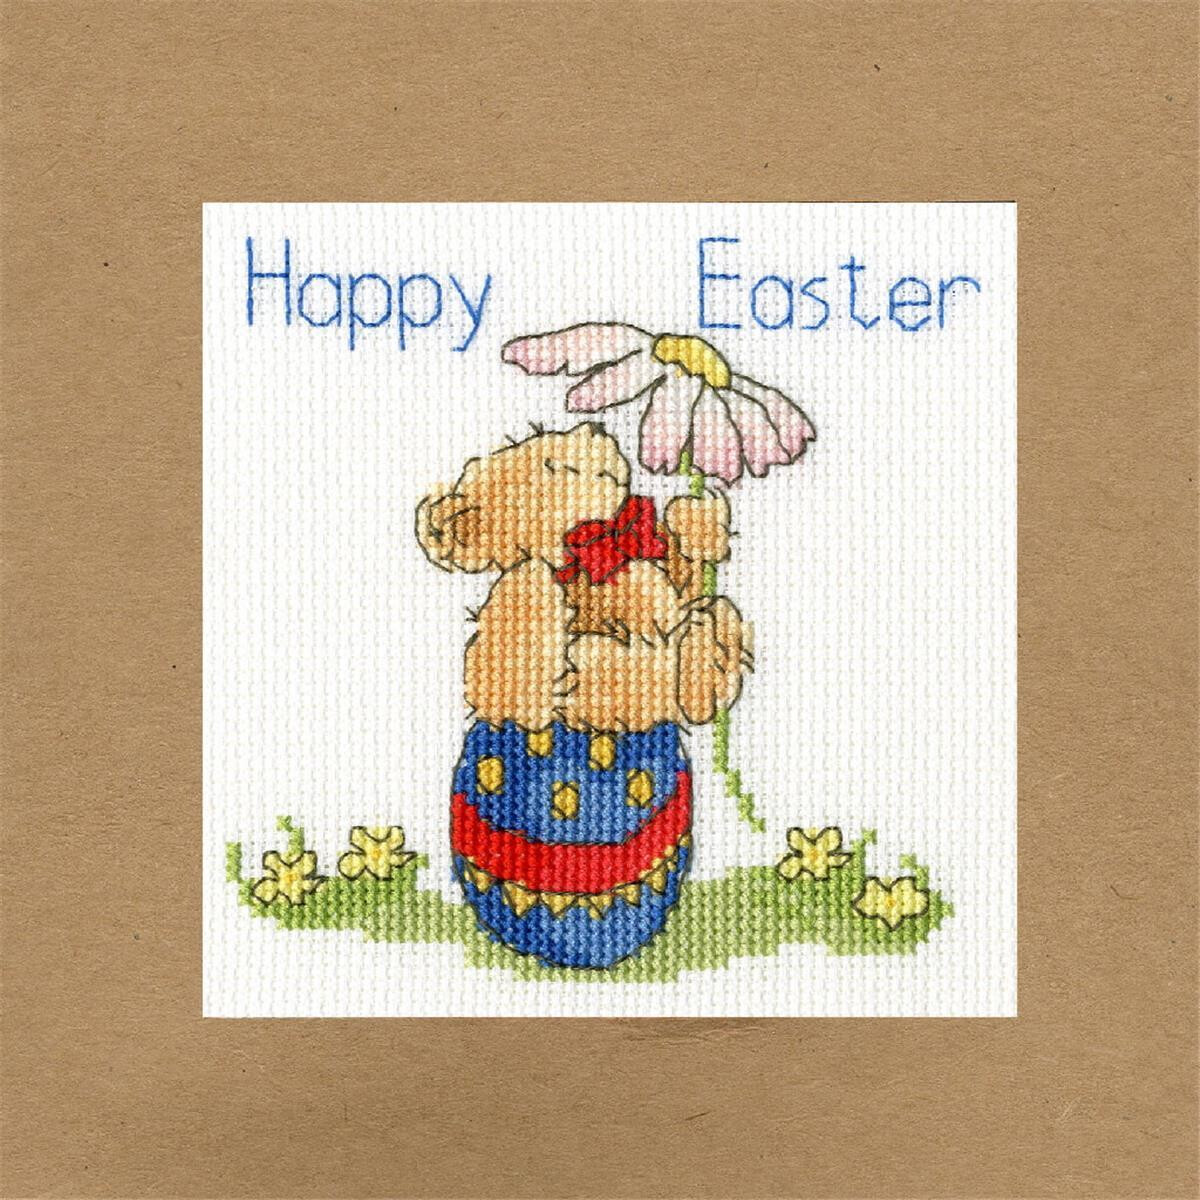 A cross-stitch illustration on beige paper shows a teddy...